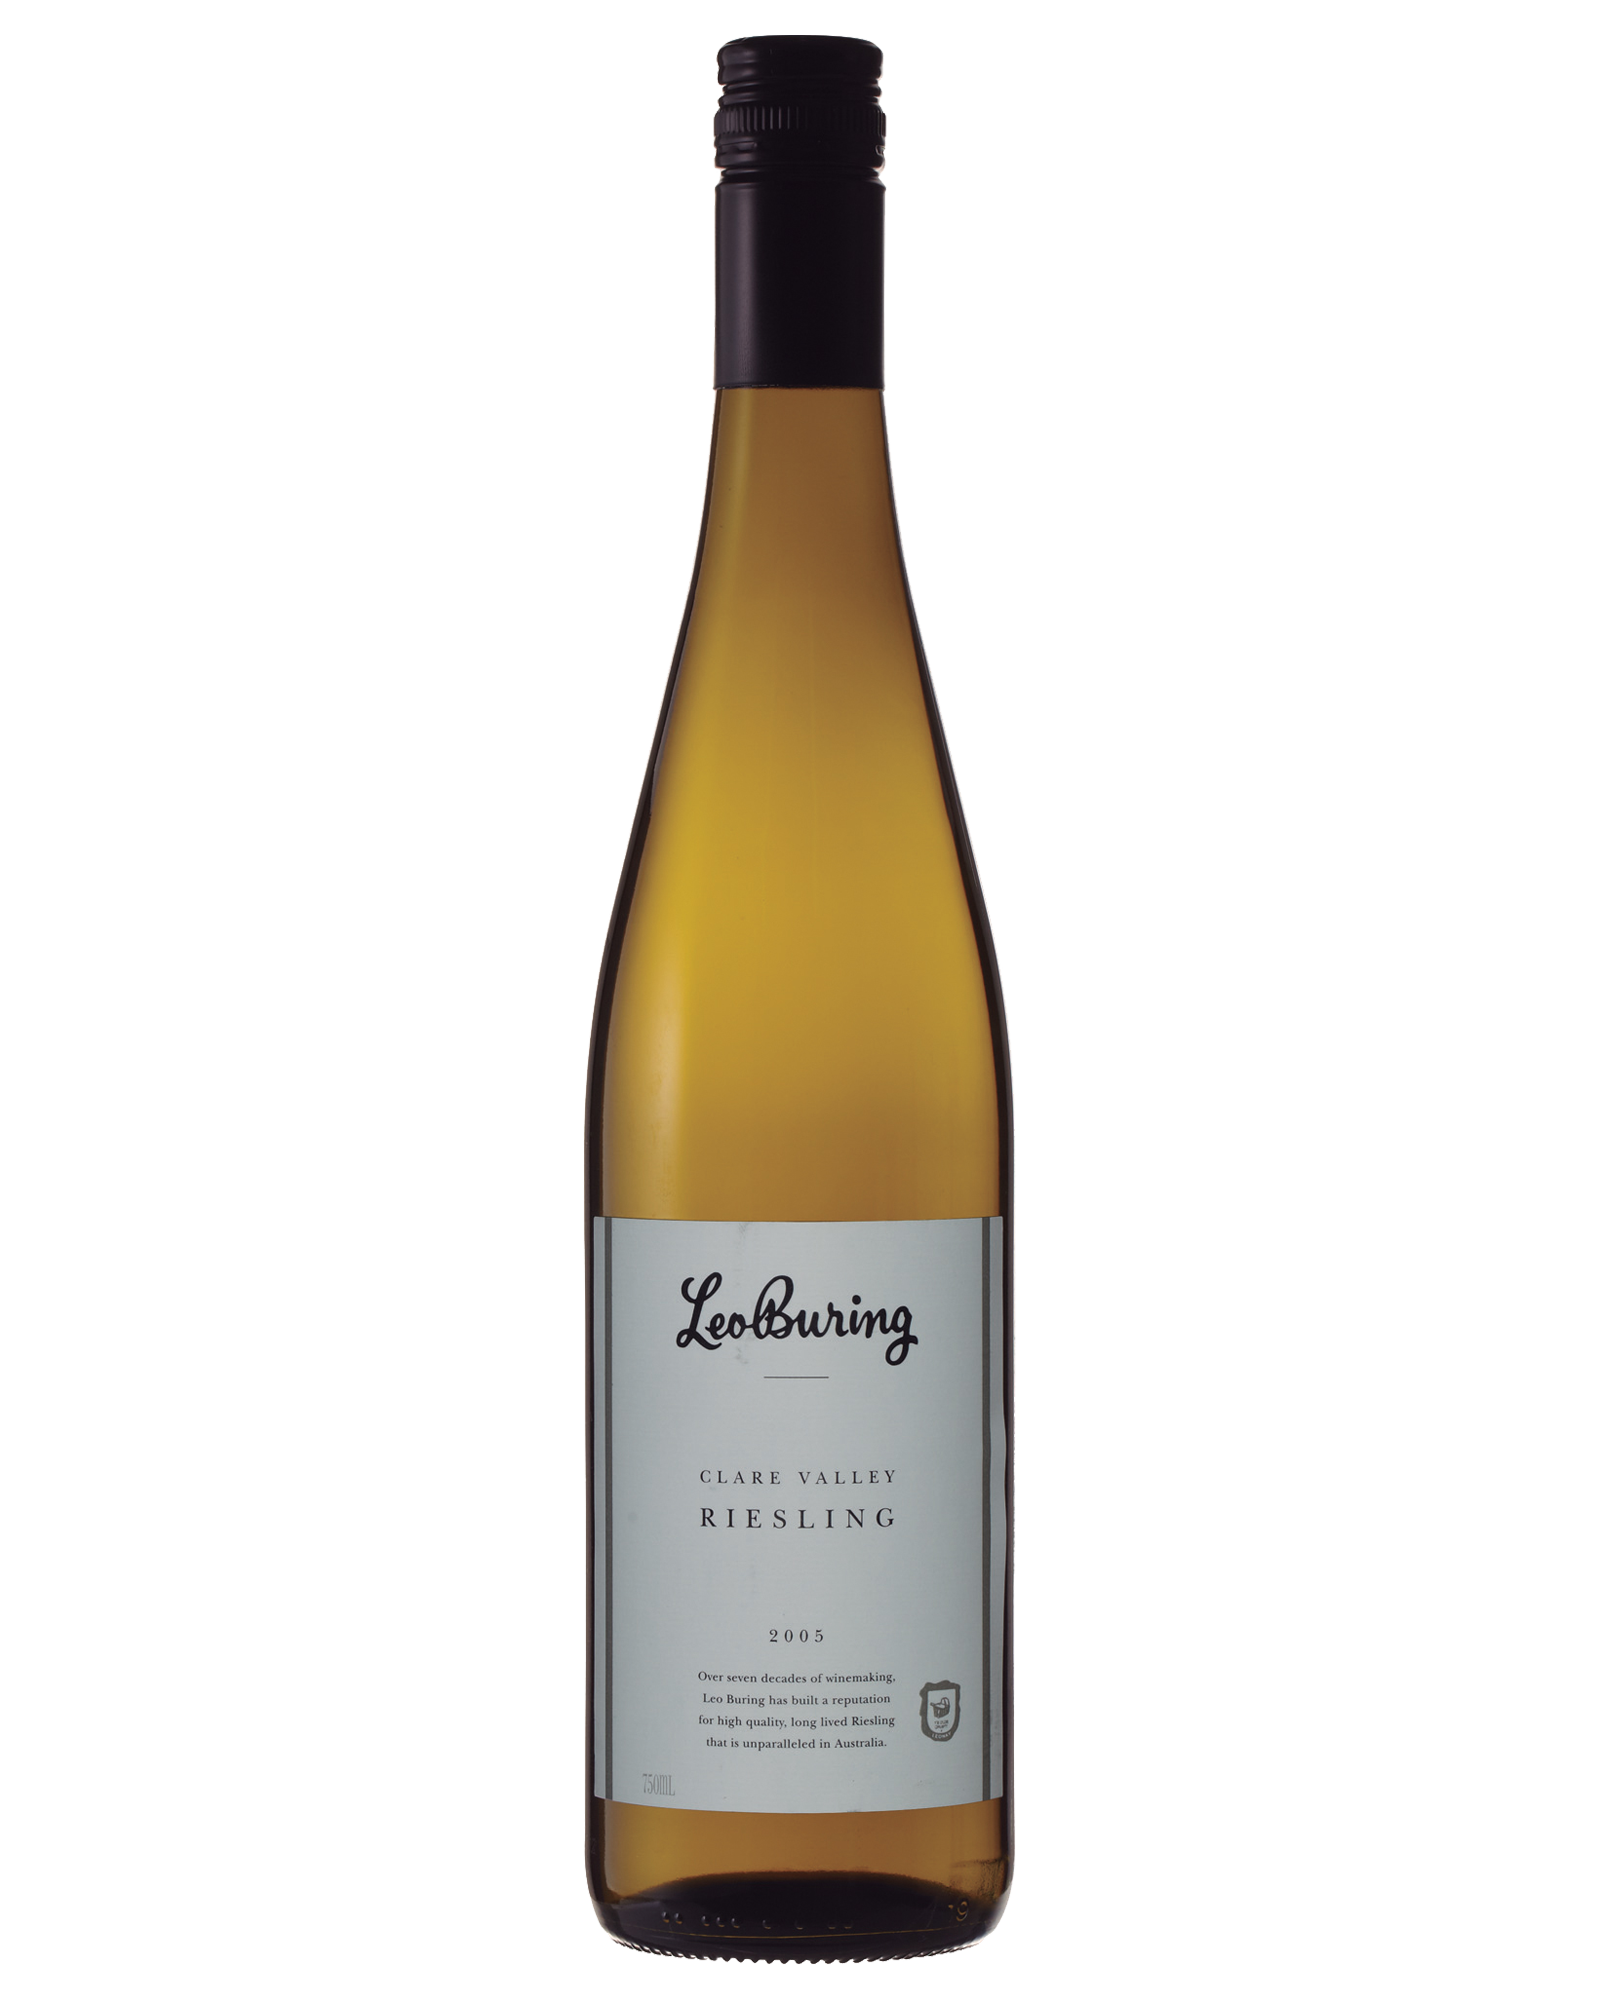 Leo Buring Clare Valley Riesling 2005